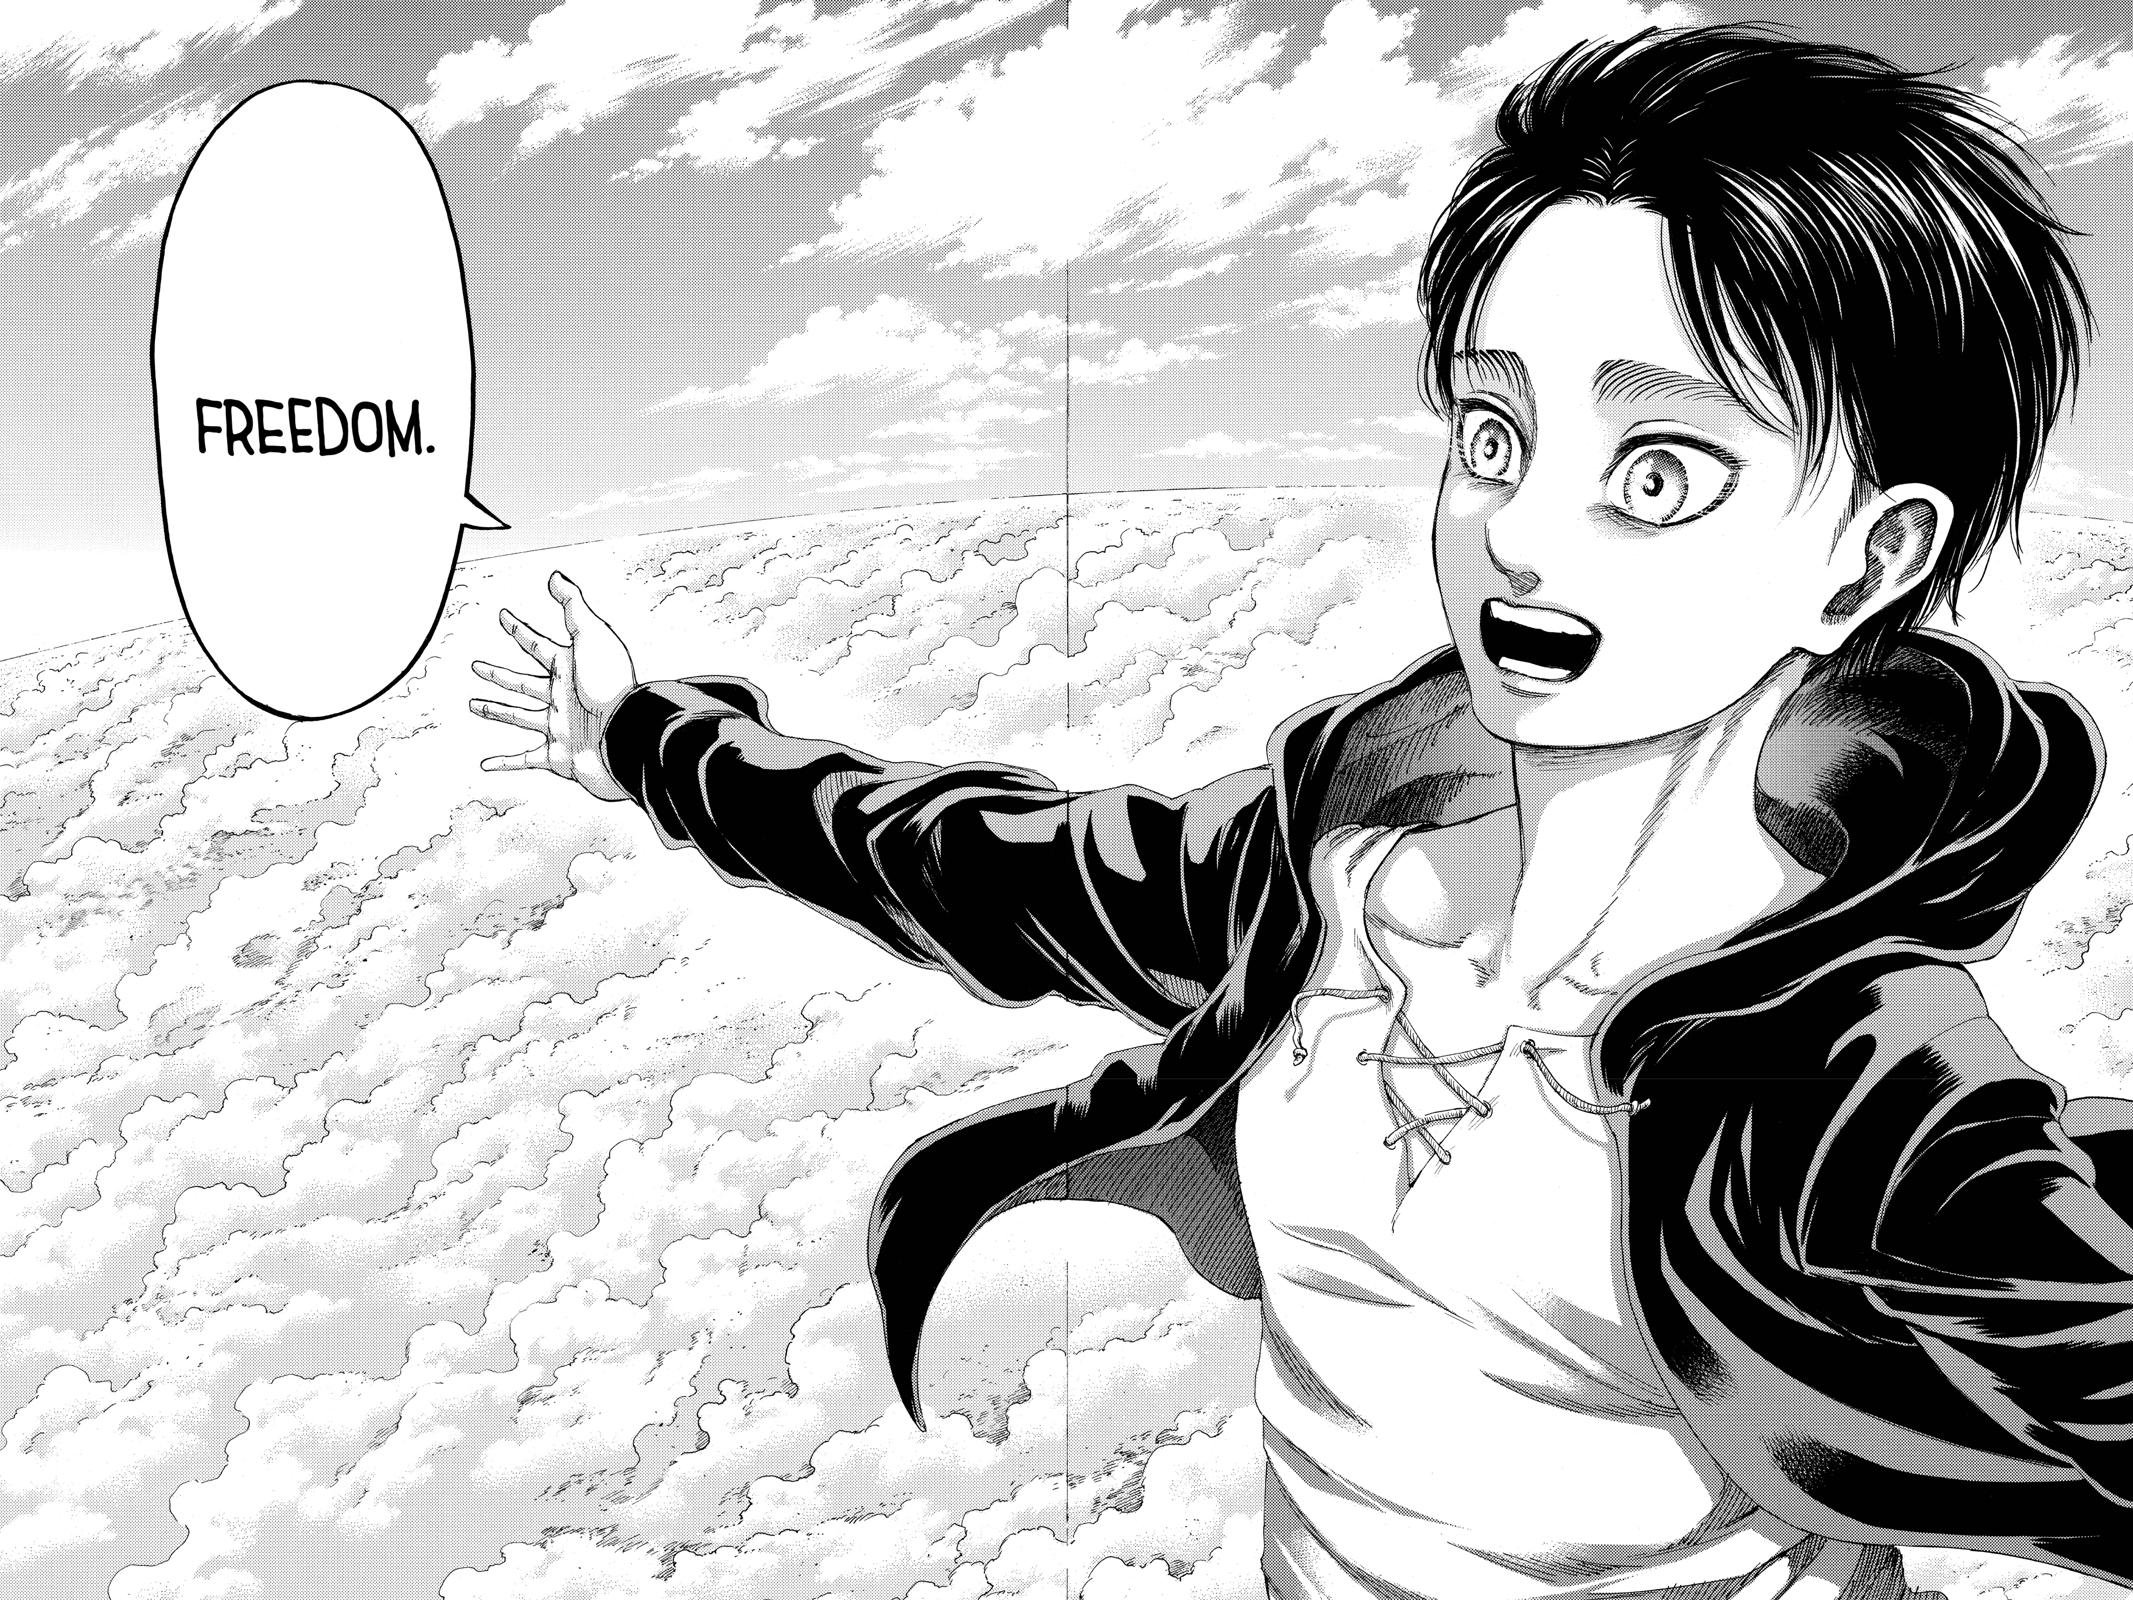 Child Eren dreaming of freedom above the clouds of steam of the colossal titans from attack on titan